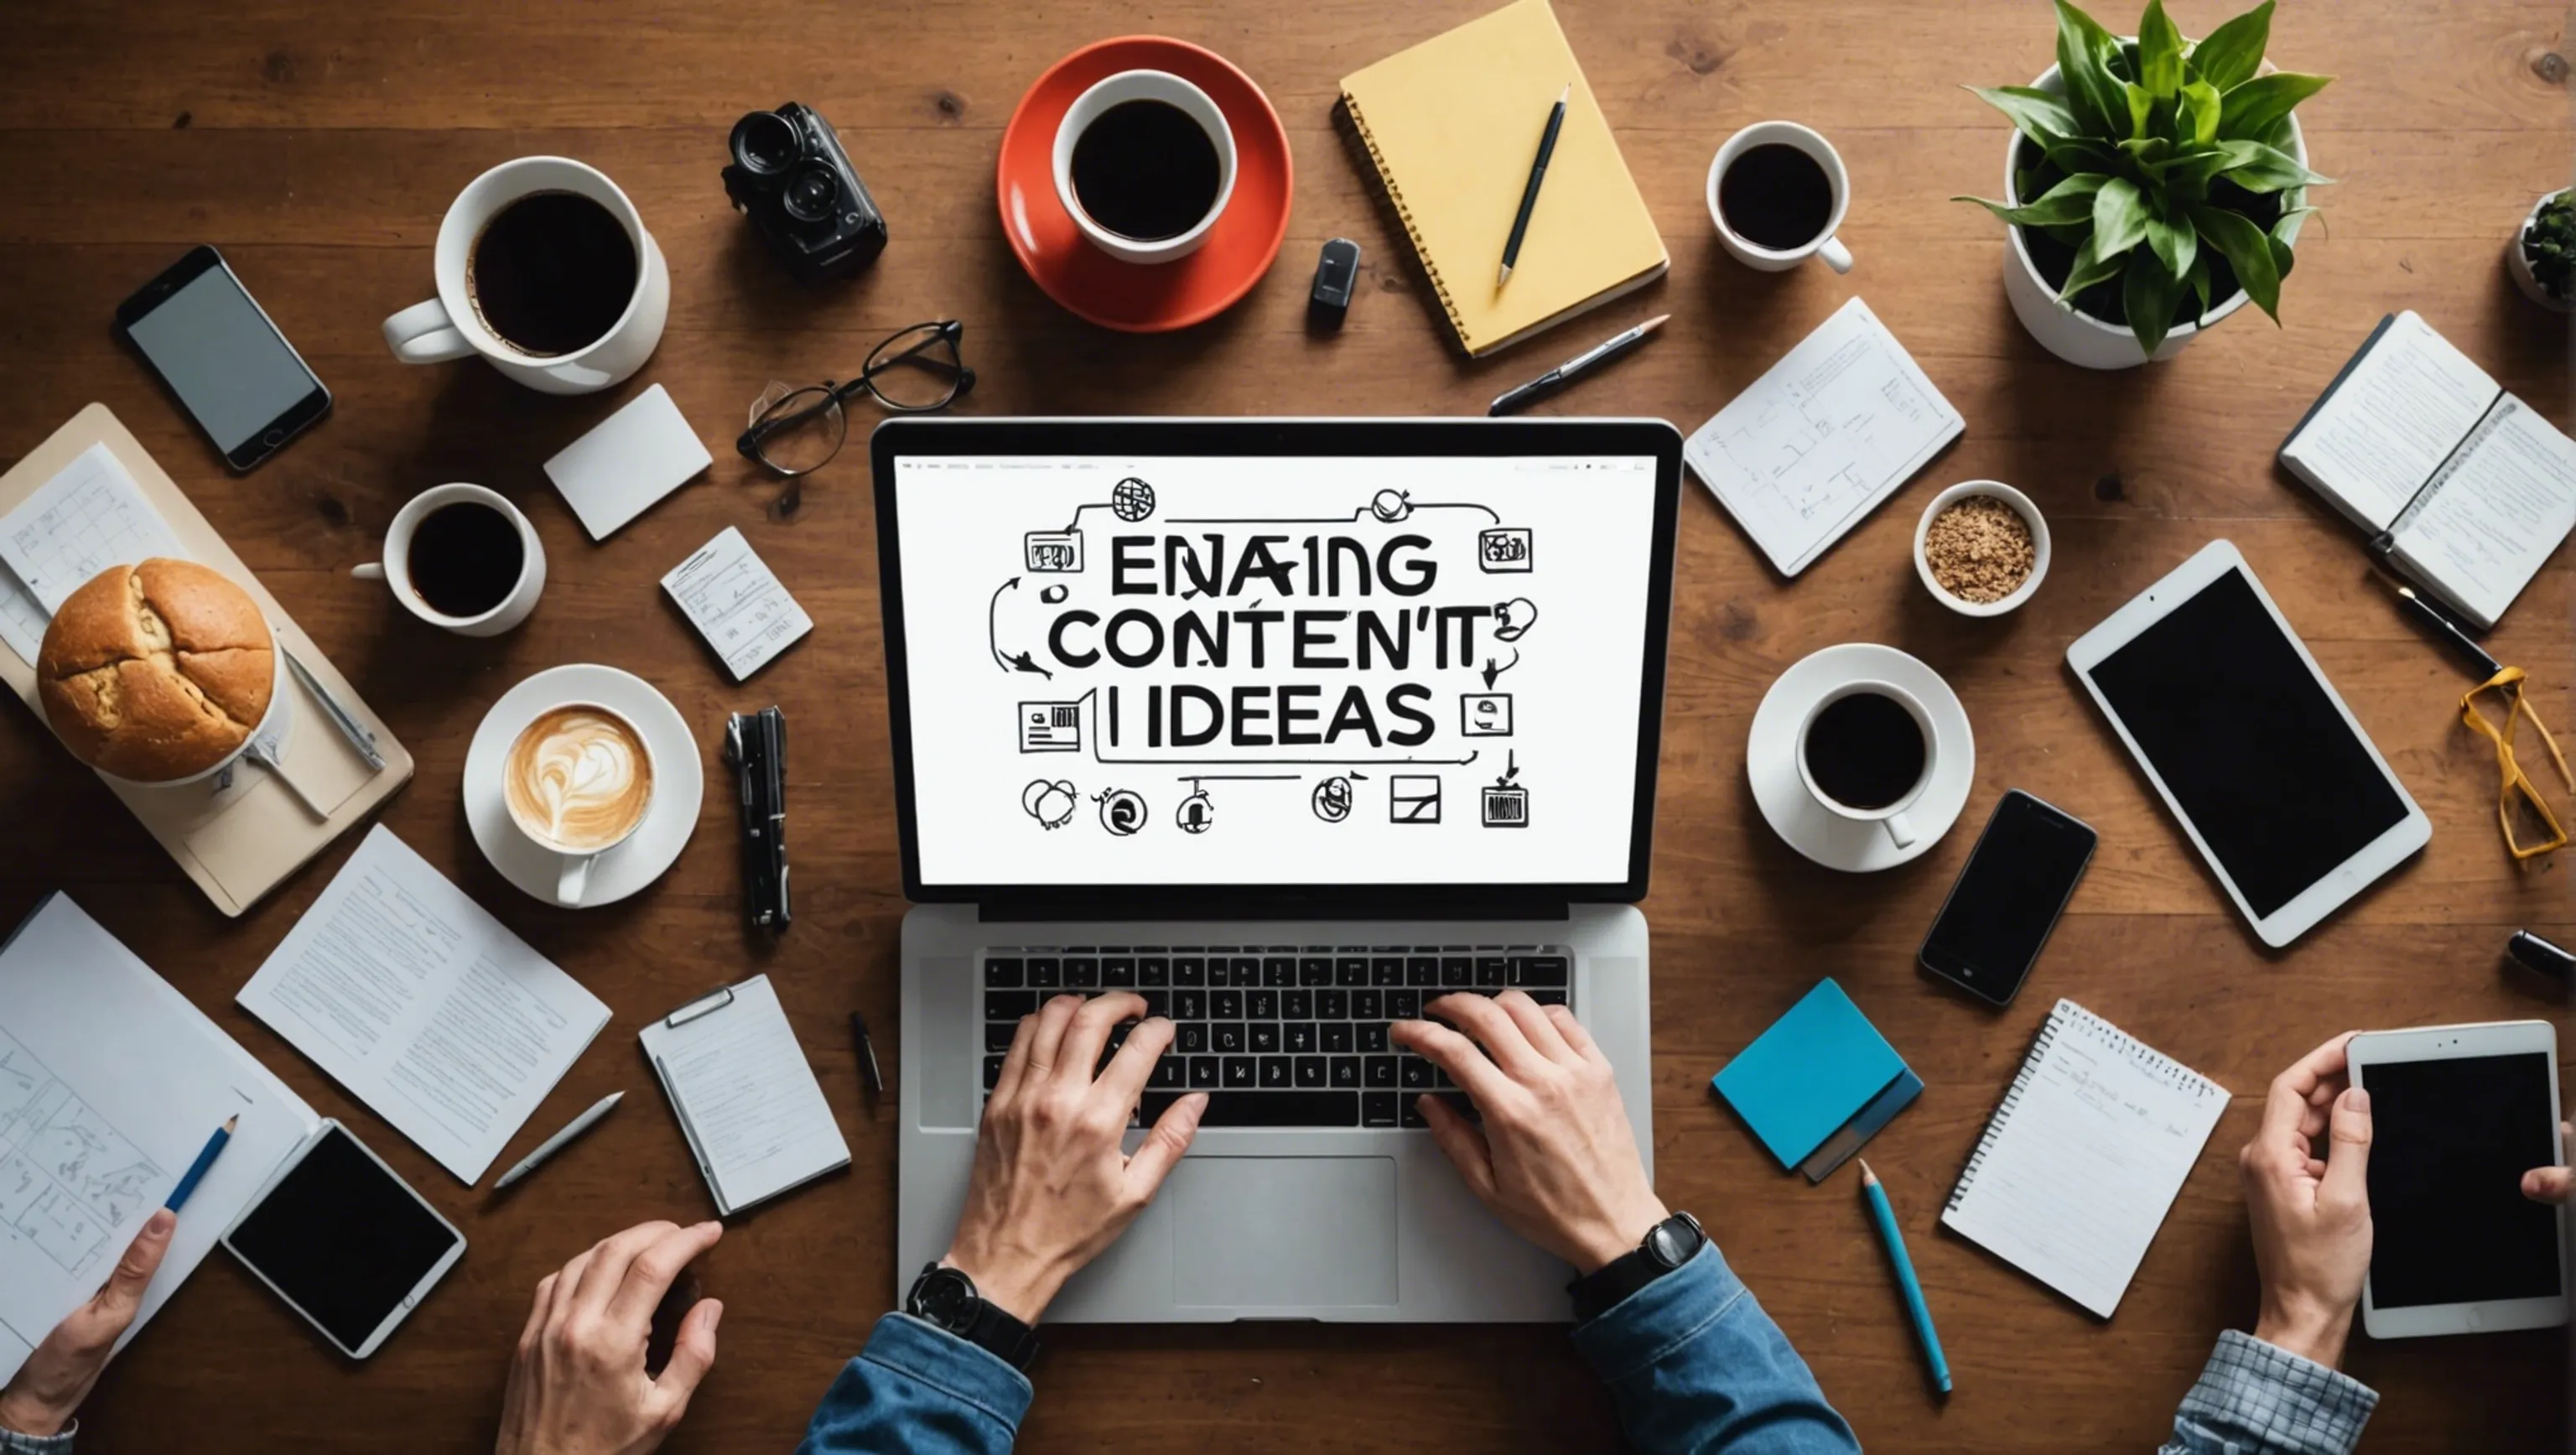 Content ideas for engaging your audience